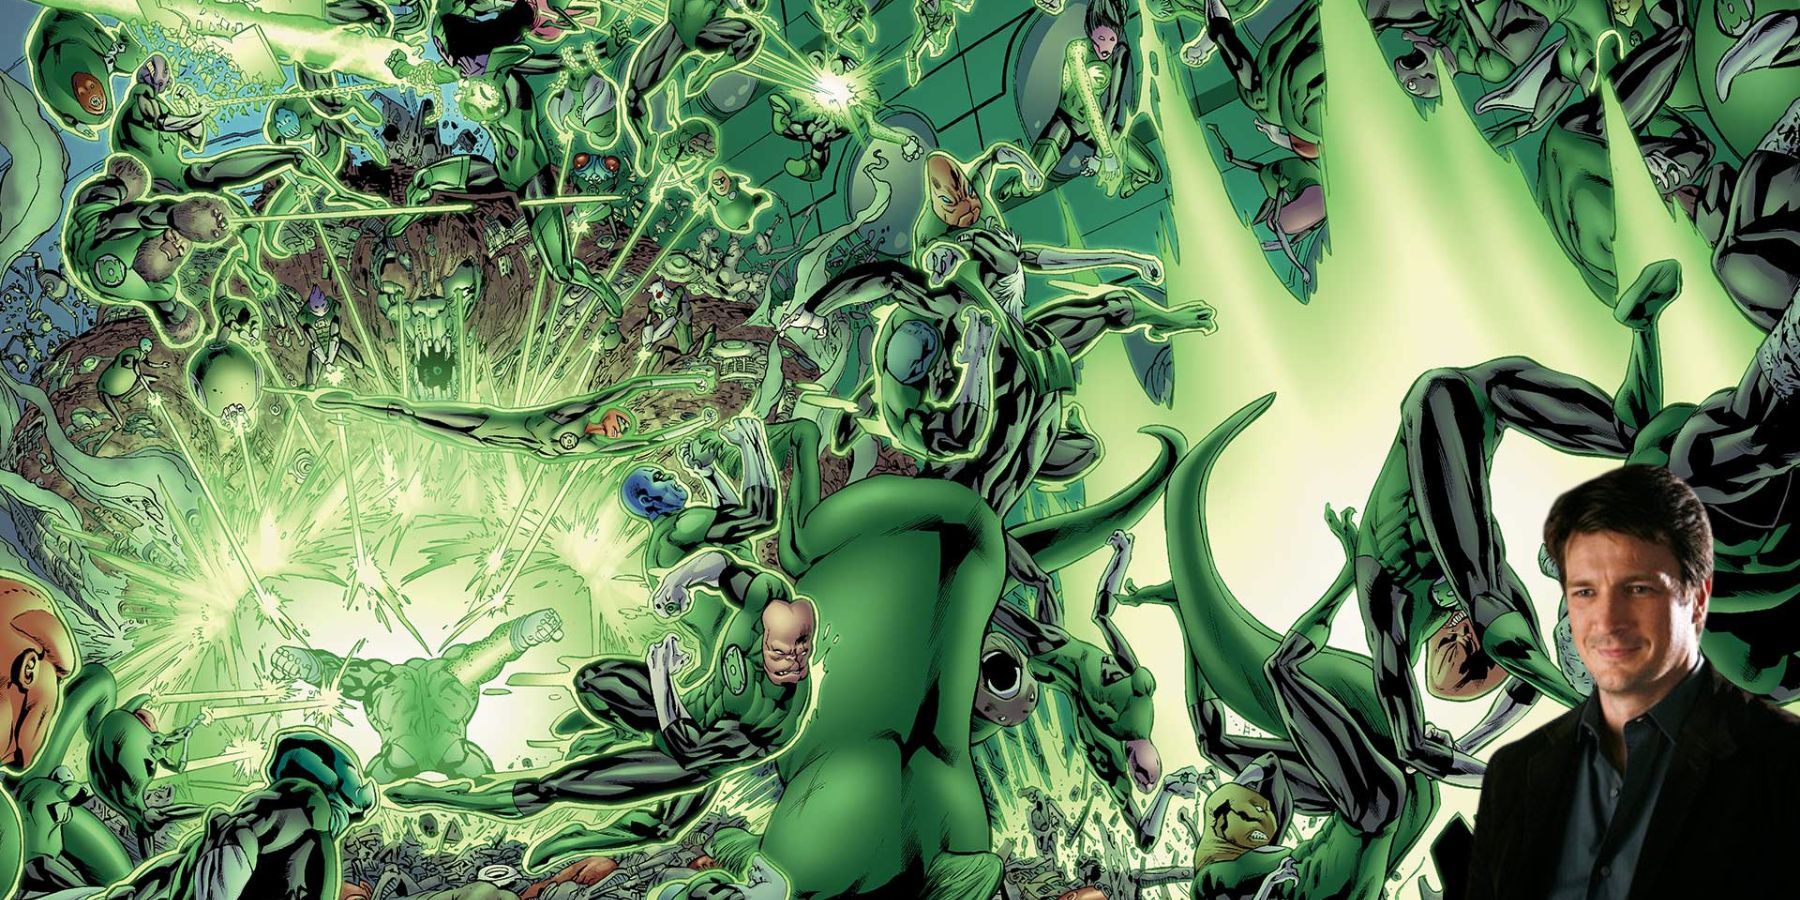 Lanterns What We'd Like To See In The DCU Series